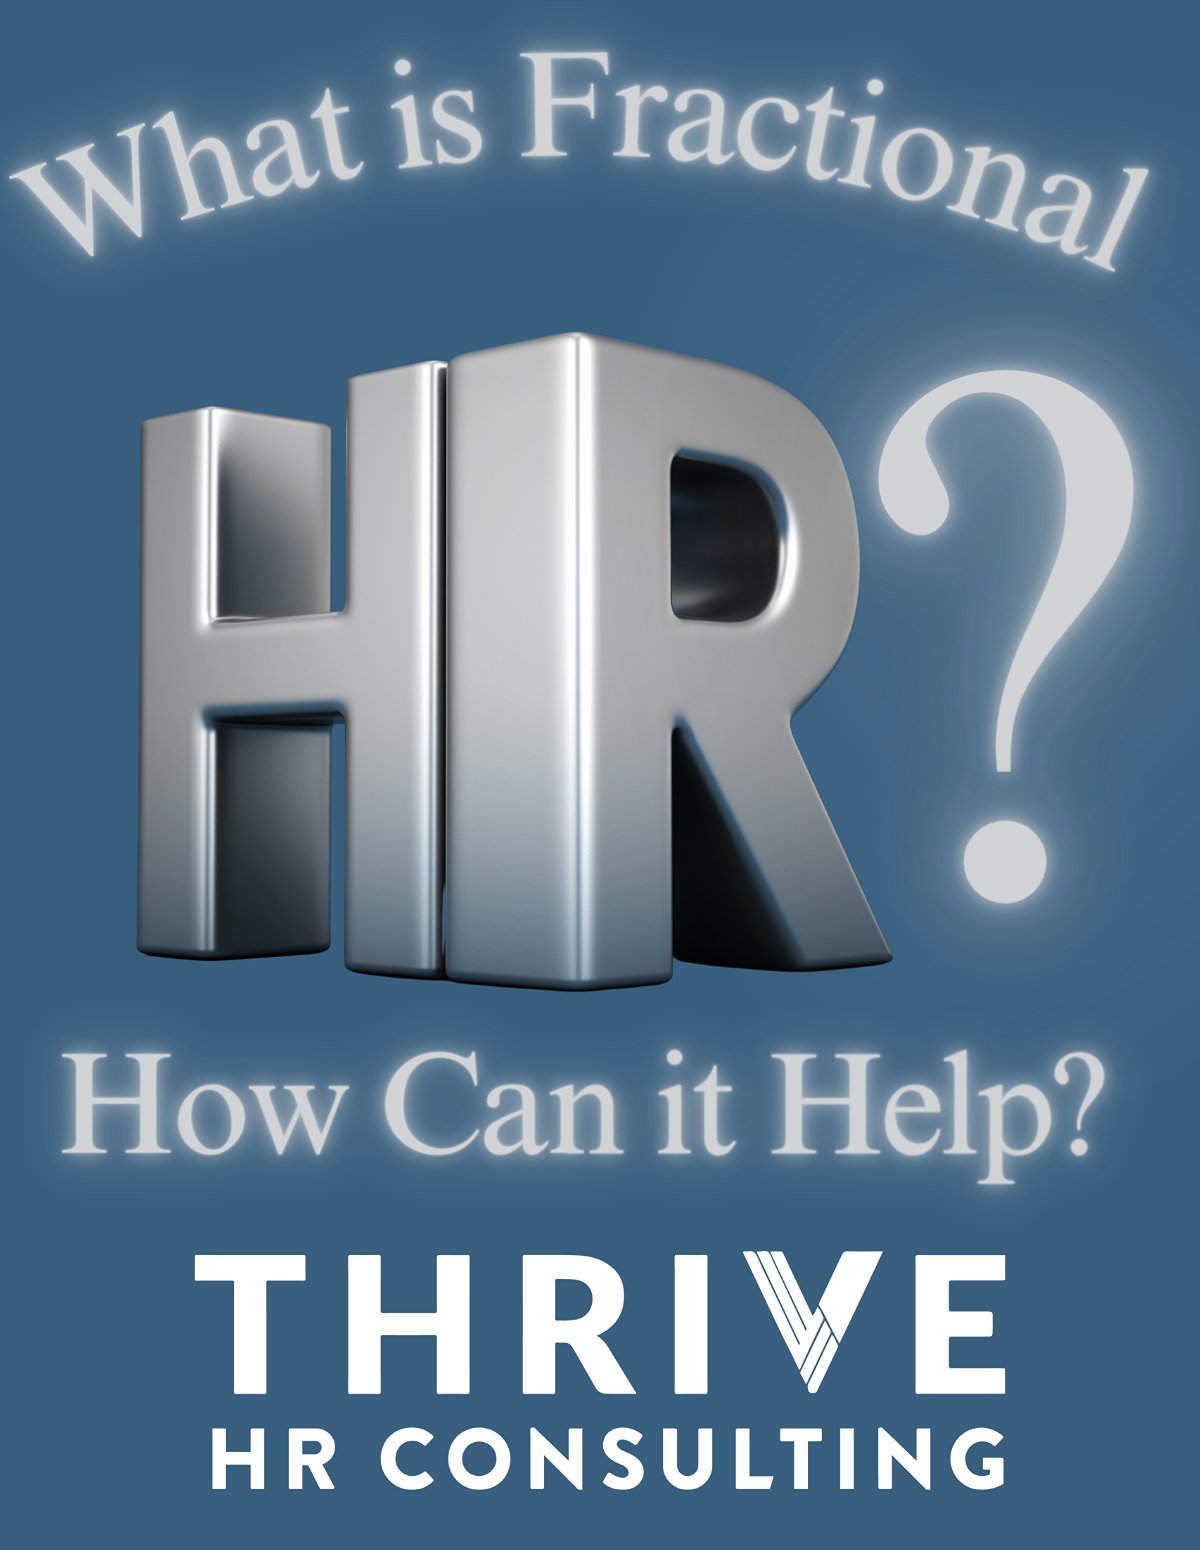 Thrive HR Consulting - Fractional Human Resources Services